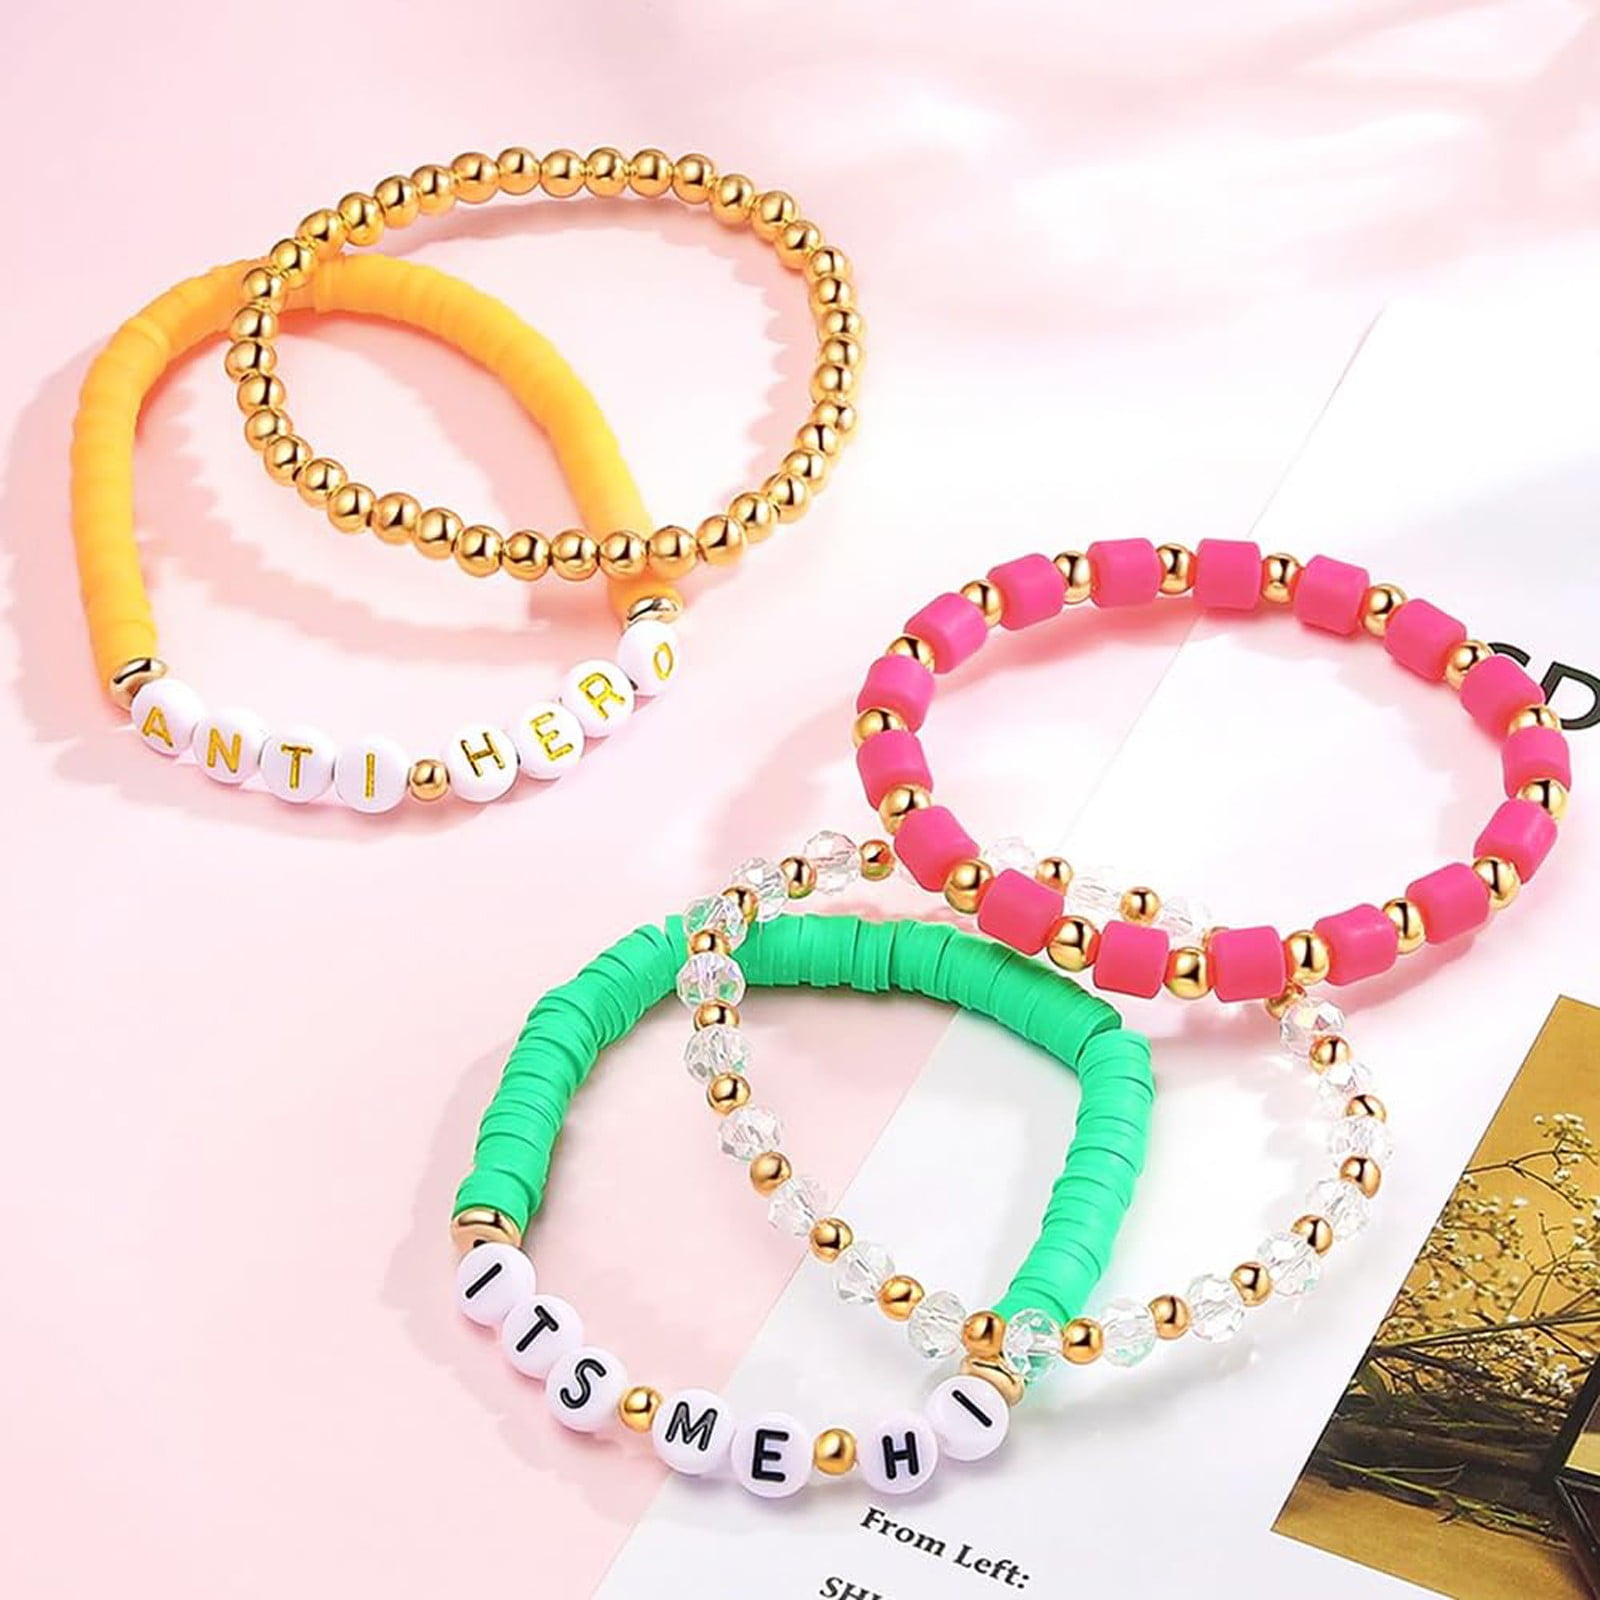 Shop Friendship Bracelet Taylor Swift Set with great discounts and